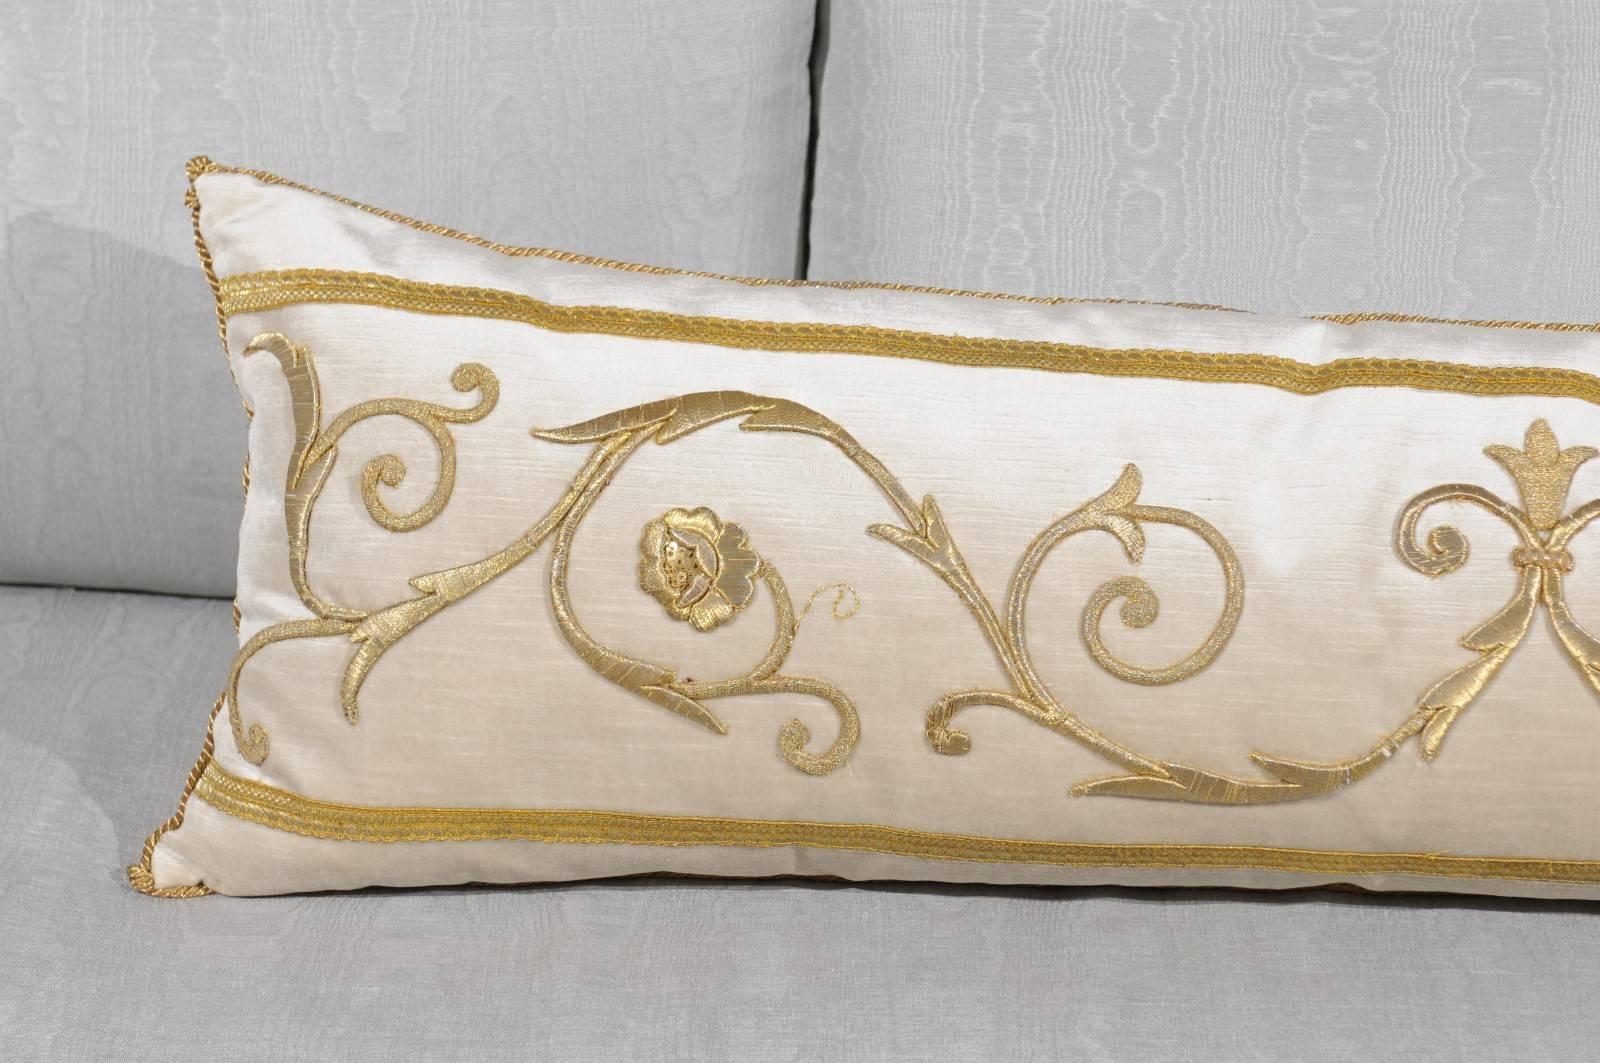 American Cushion with Antique European Raised Gold Metallic Embroidery on Oyster Velvet